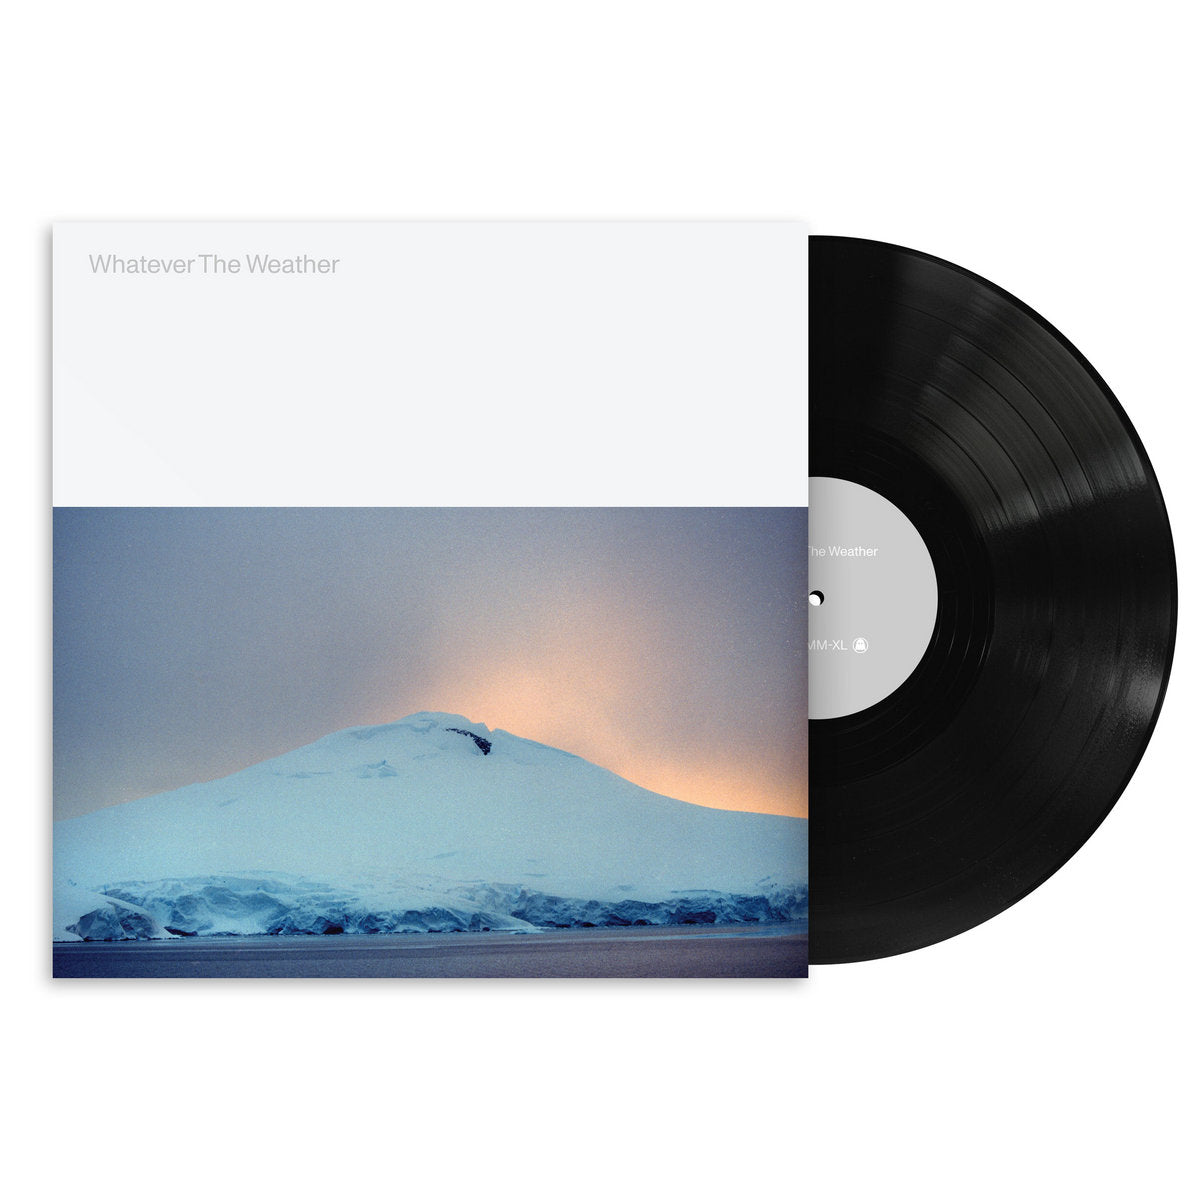 WHATEVER THE WEATHER - Whatever The Weather - LP - Vinyl